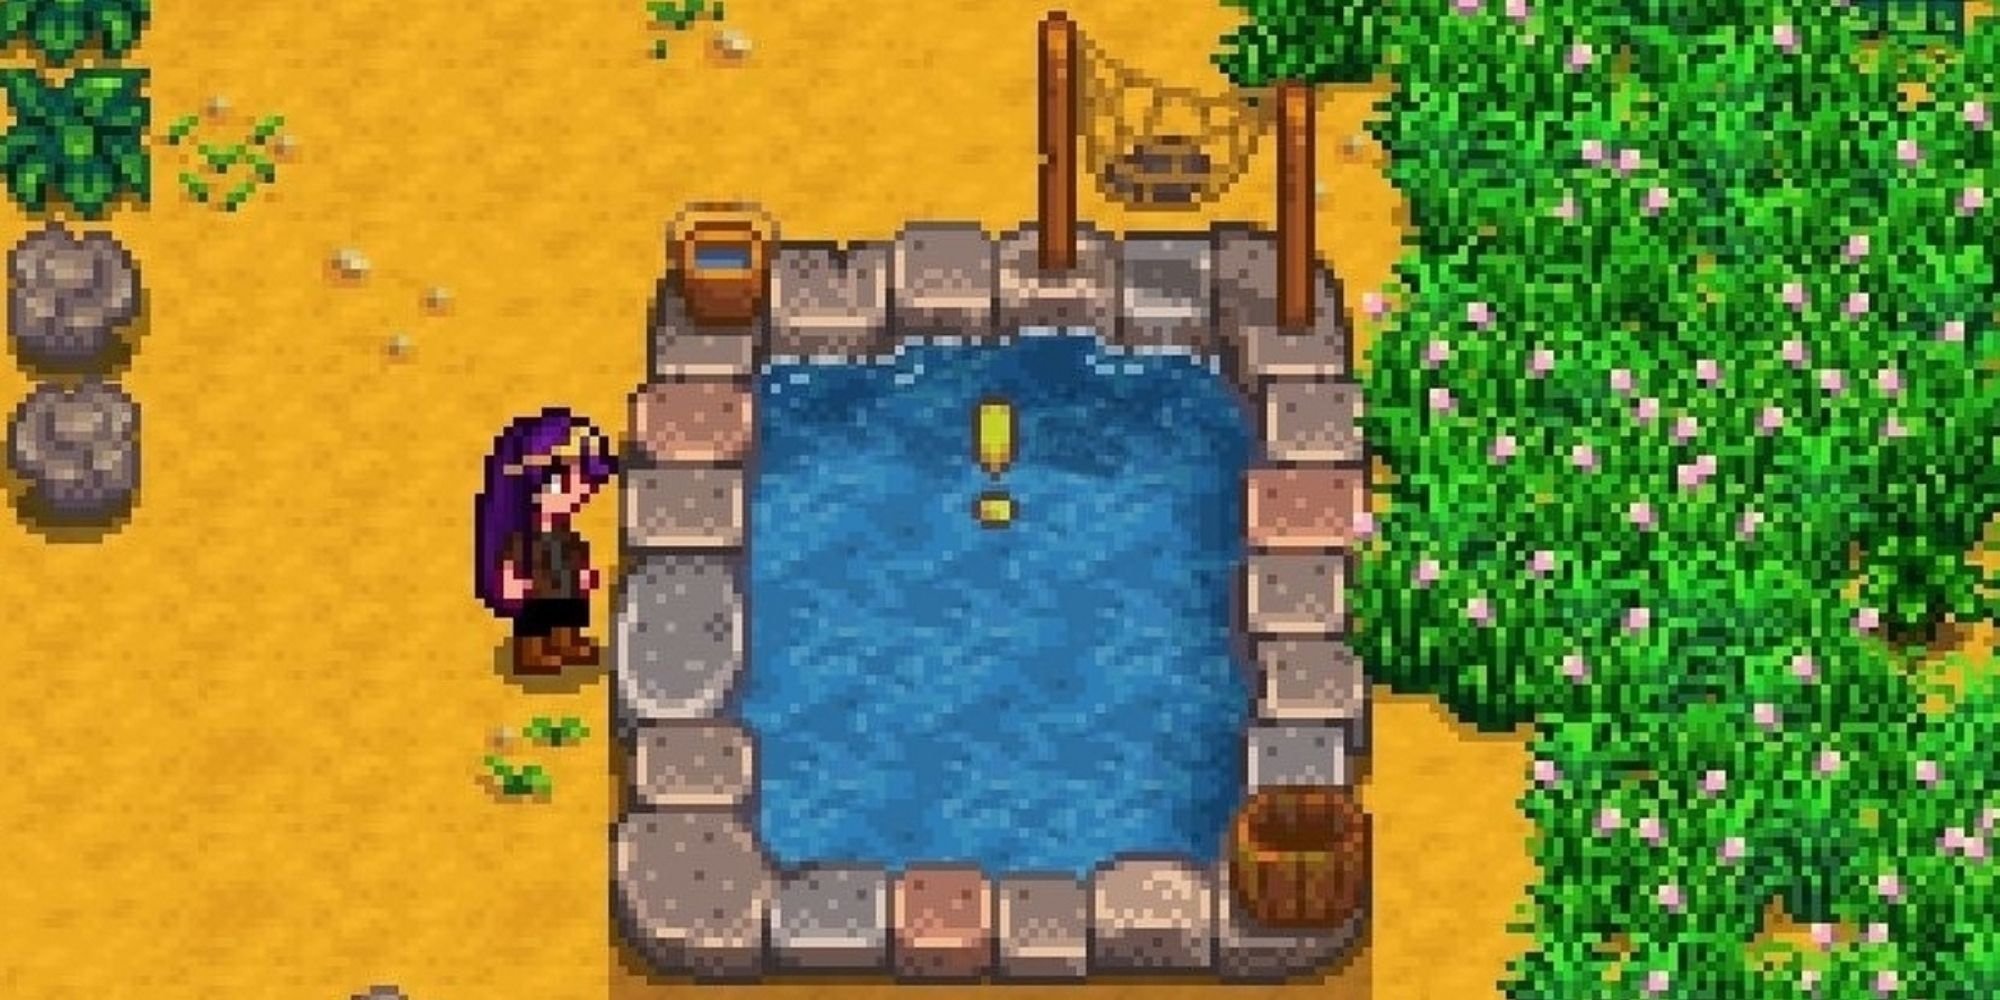 Stardew Valley: An image of the player character standing besides a Fish Pond marked with a yellow exclamation point